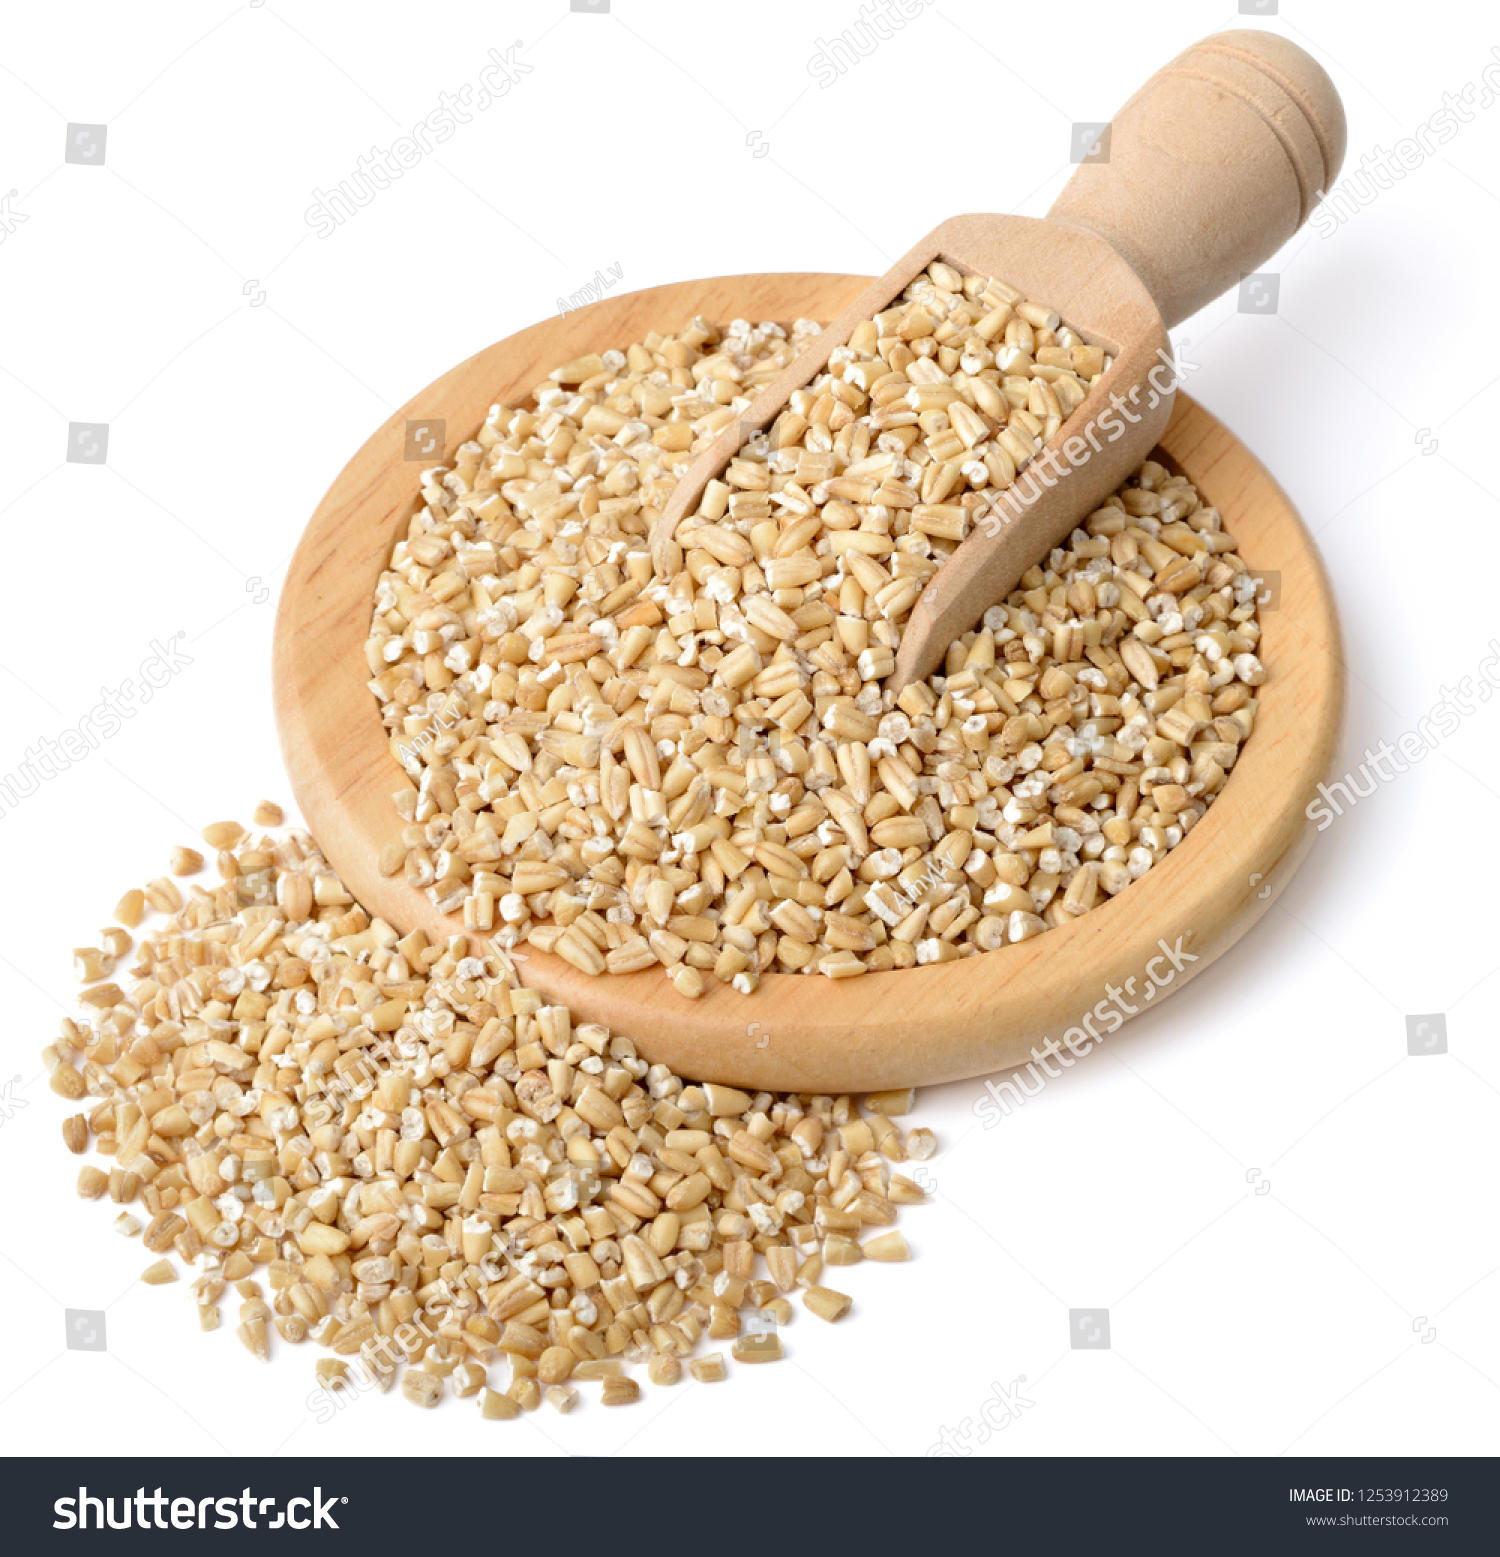 raw steel cut oats in the wooden scoop and plate, isolated on the white background #1253912389